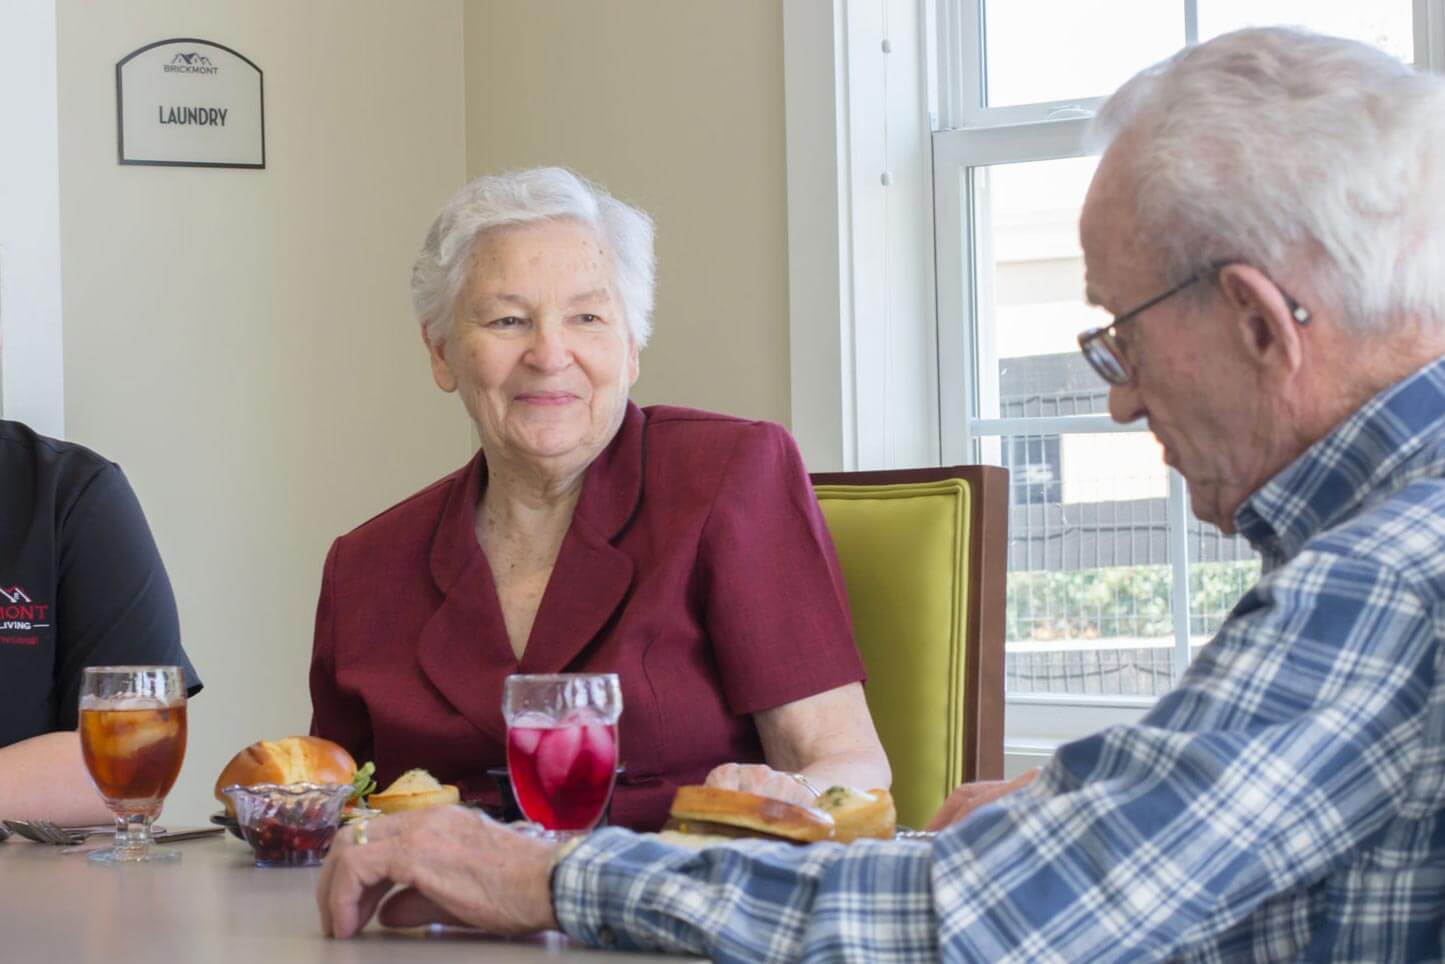 Memory Care residents dining together